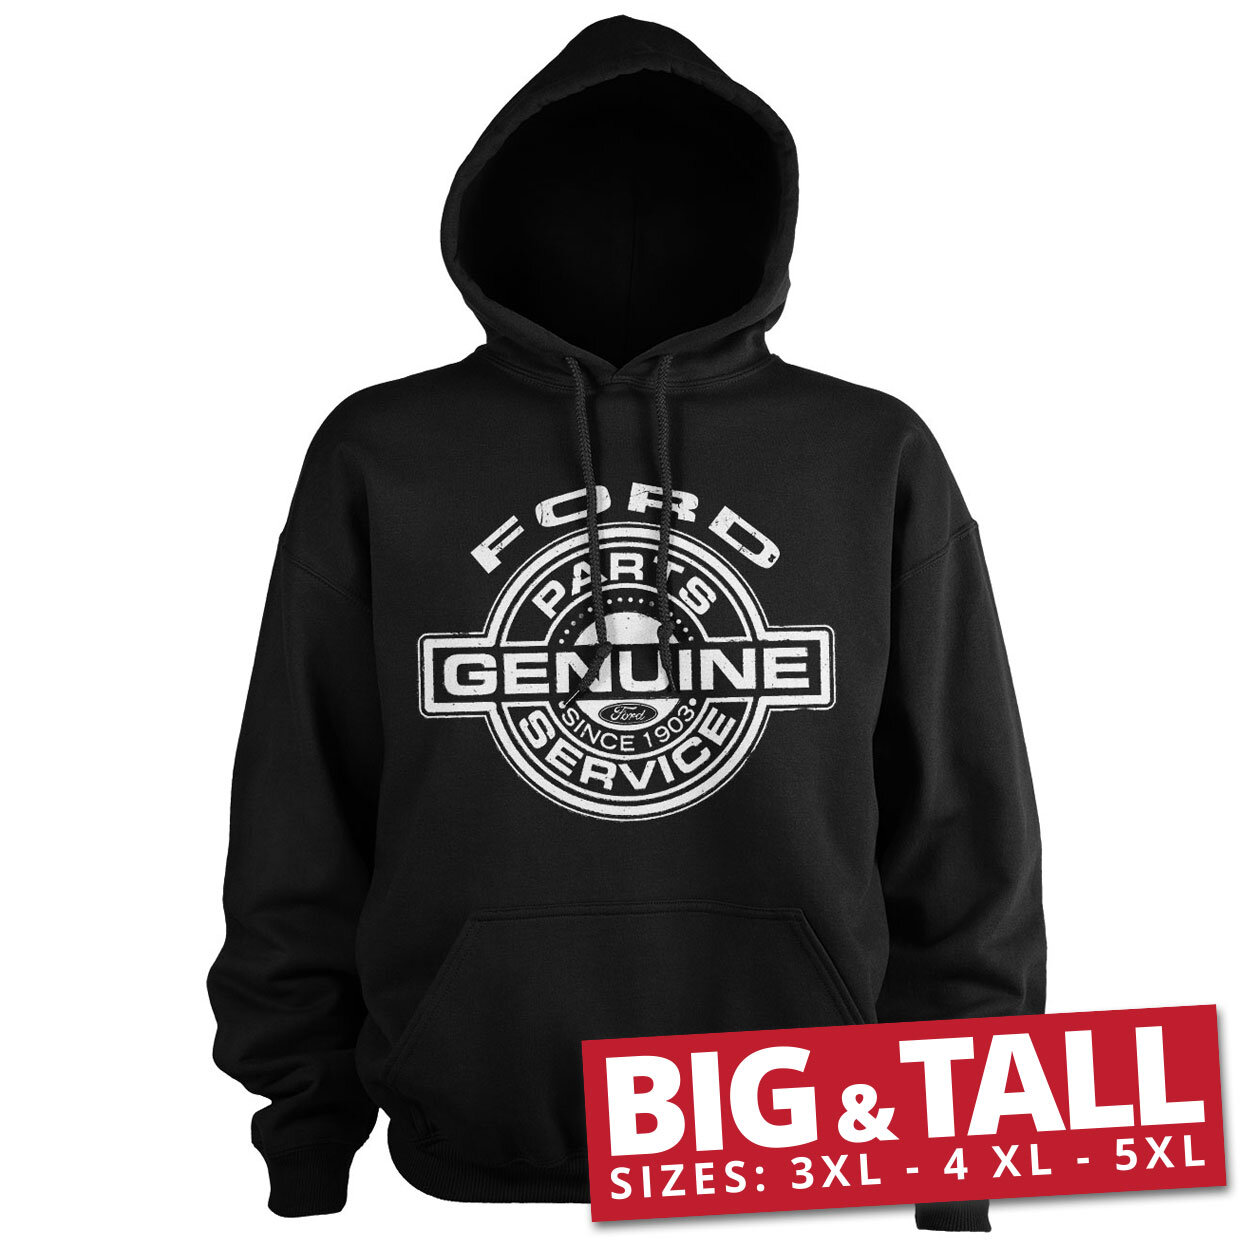 Ford - Genuine Parts And Service Big & Tall Hoodie